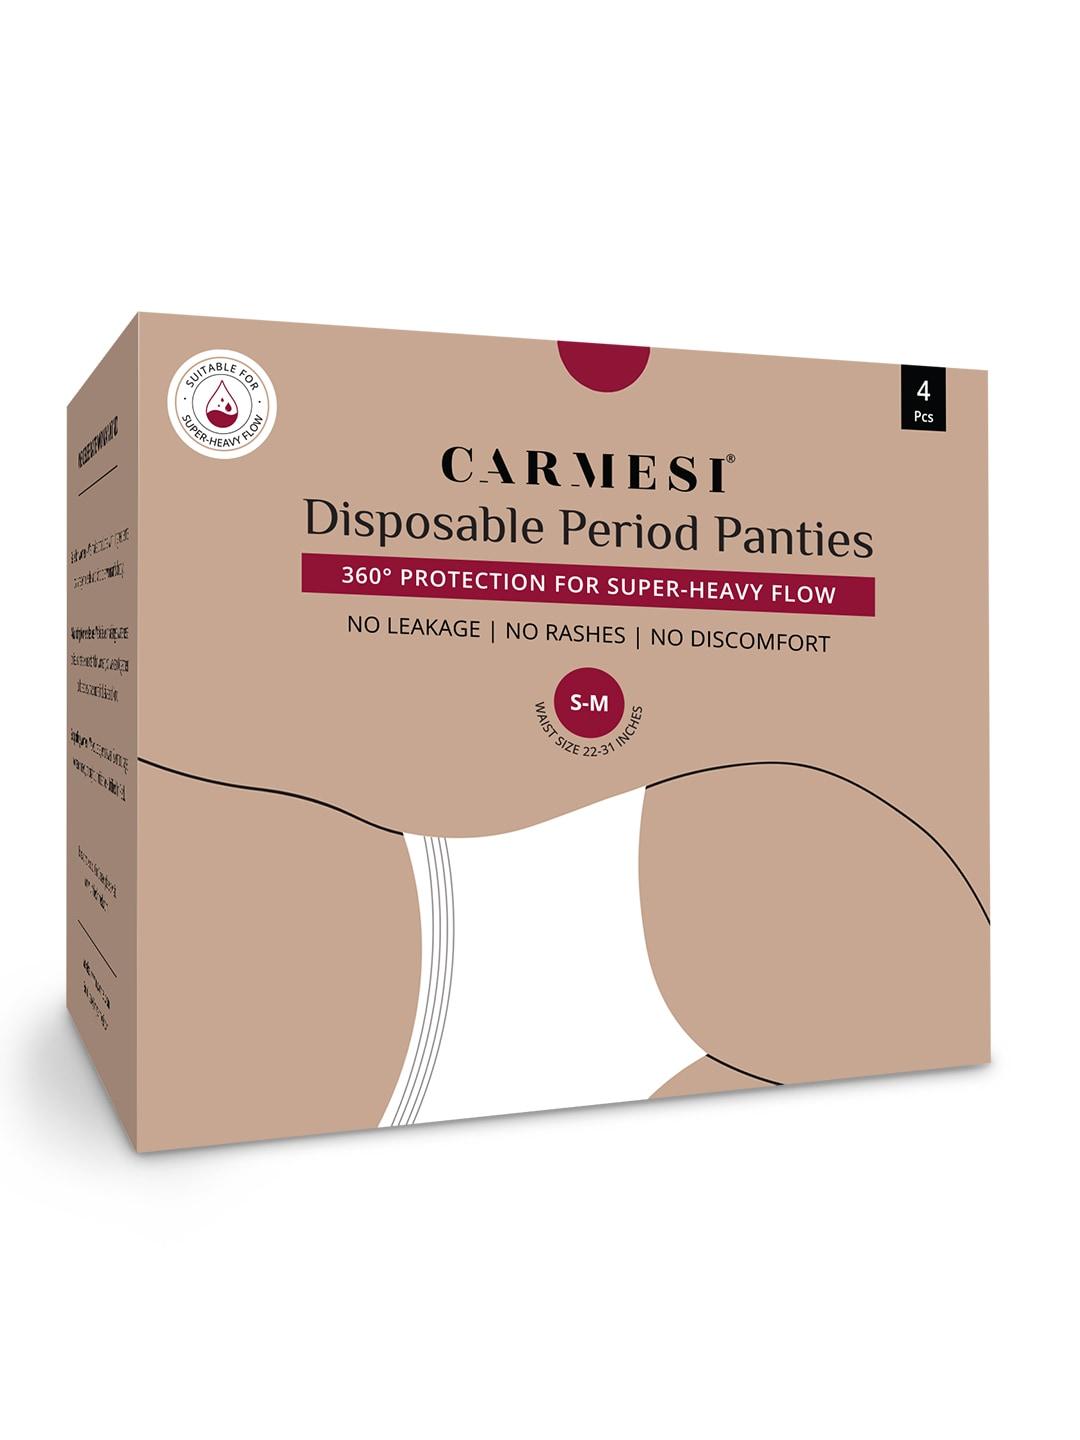 carmesi disposable period panties s-m with 360deg protection for super heavy flow  - 4 pcs